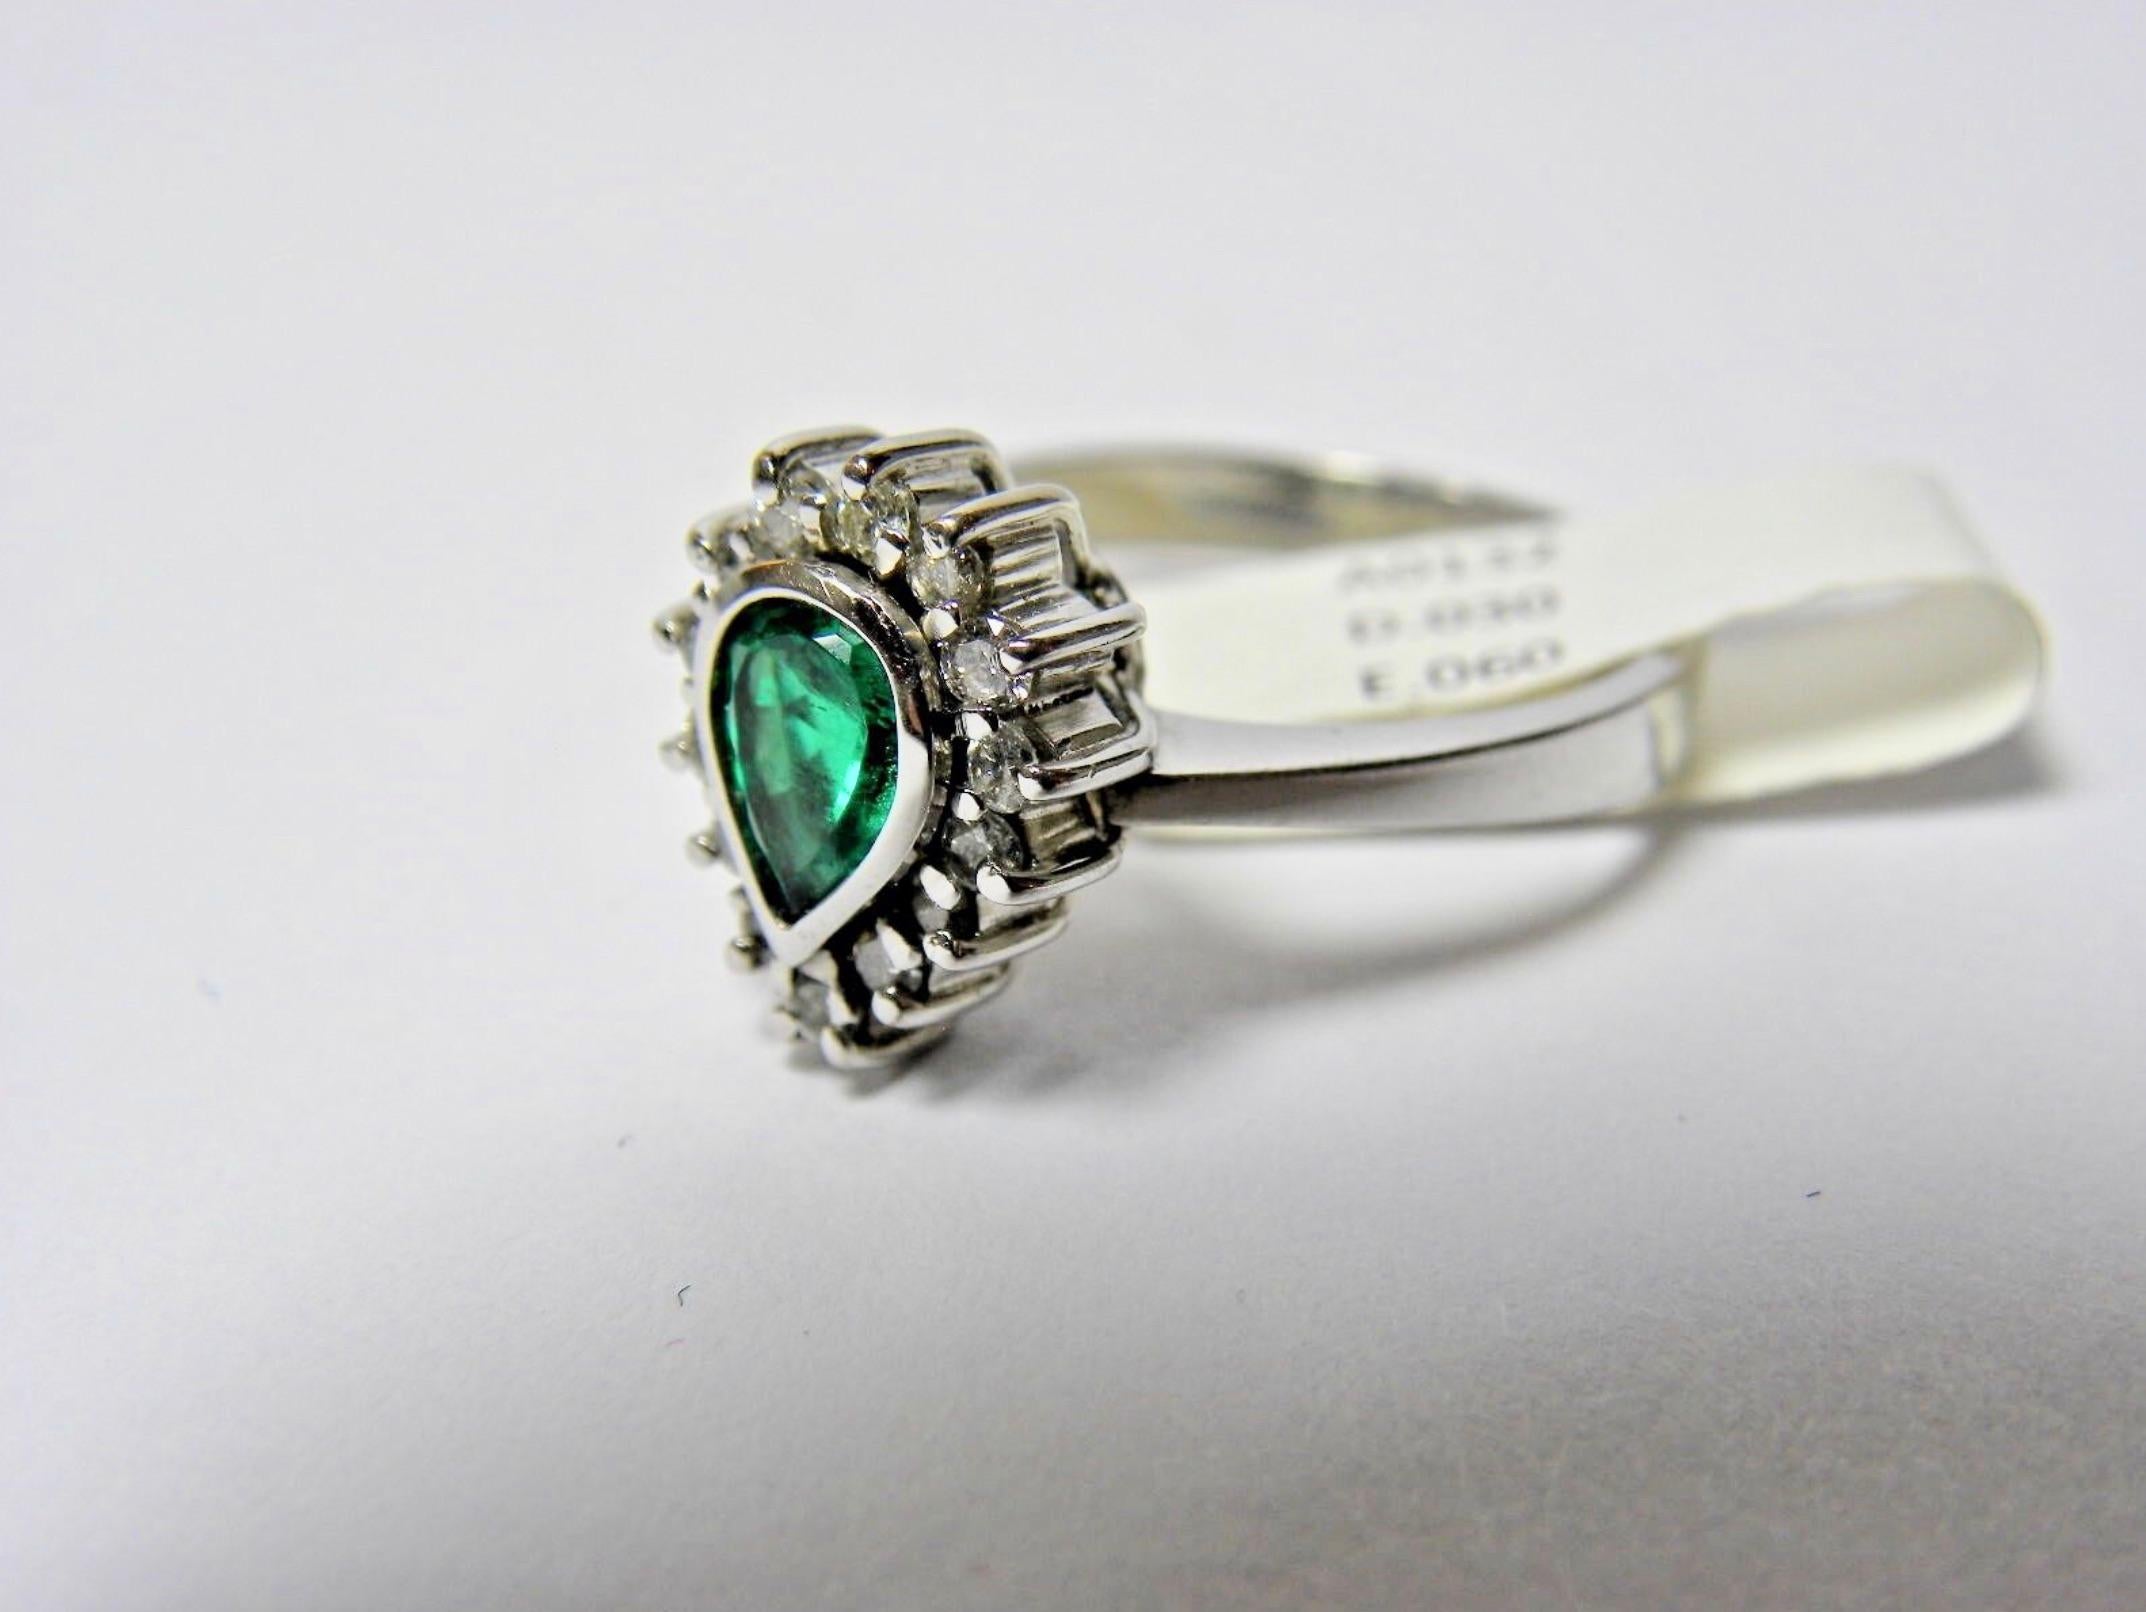 This is a beautiful and exclusive design  Emerald and Diamond Engagement Ring
Feature 1 genuine and natural HIGH QUALITY COLOMBIAN EMERALDS
Pear Cut 0.60 Carats Total Weight 
The emerald is bezel set Shimmering Perfect AAA Intense Medium Green